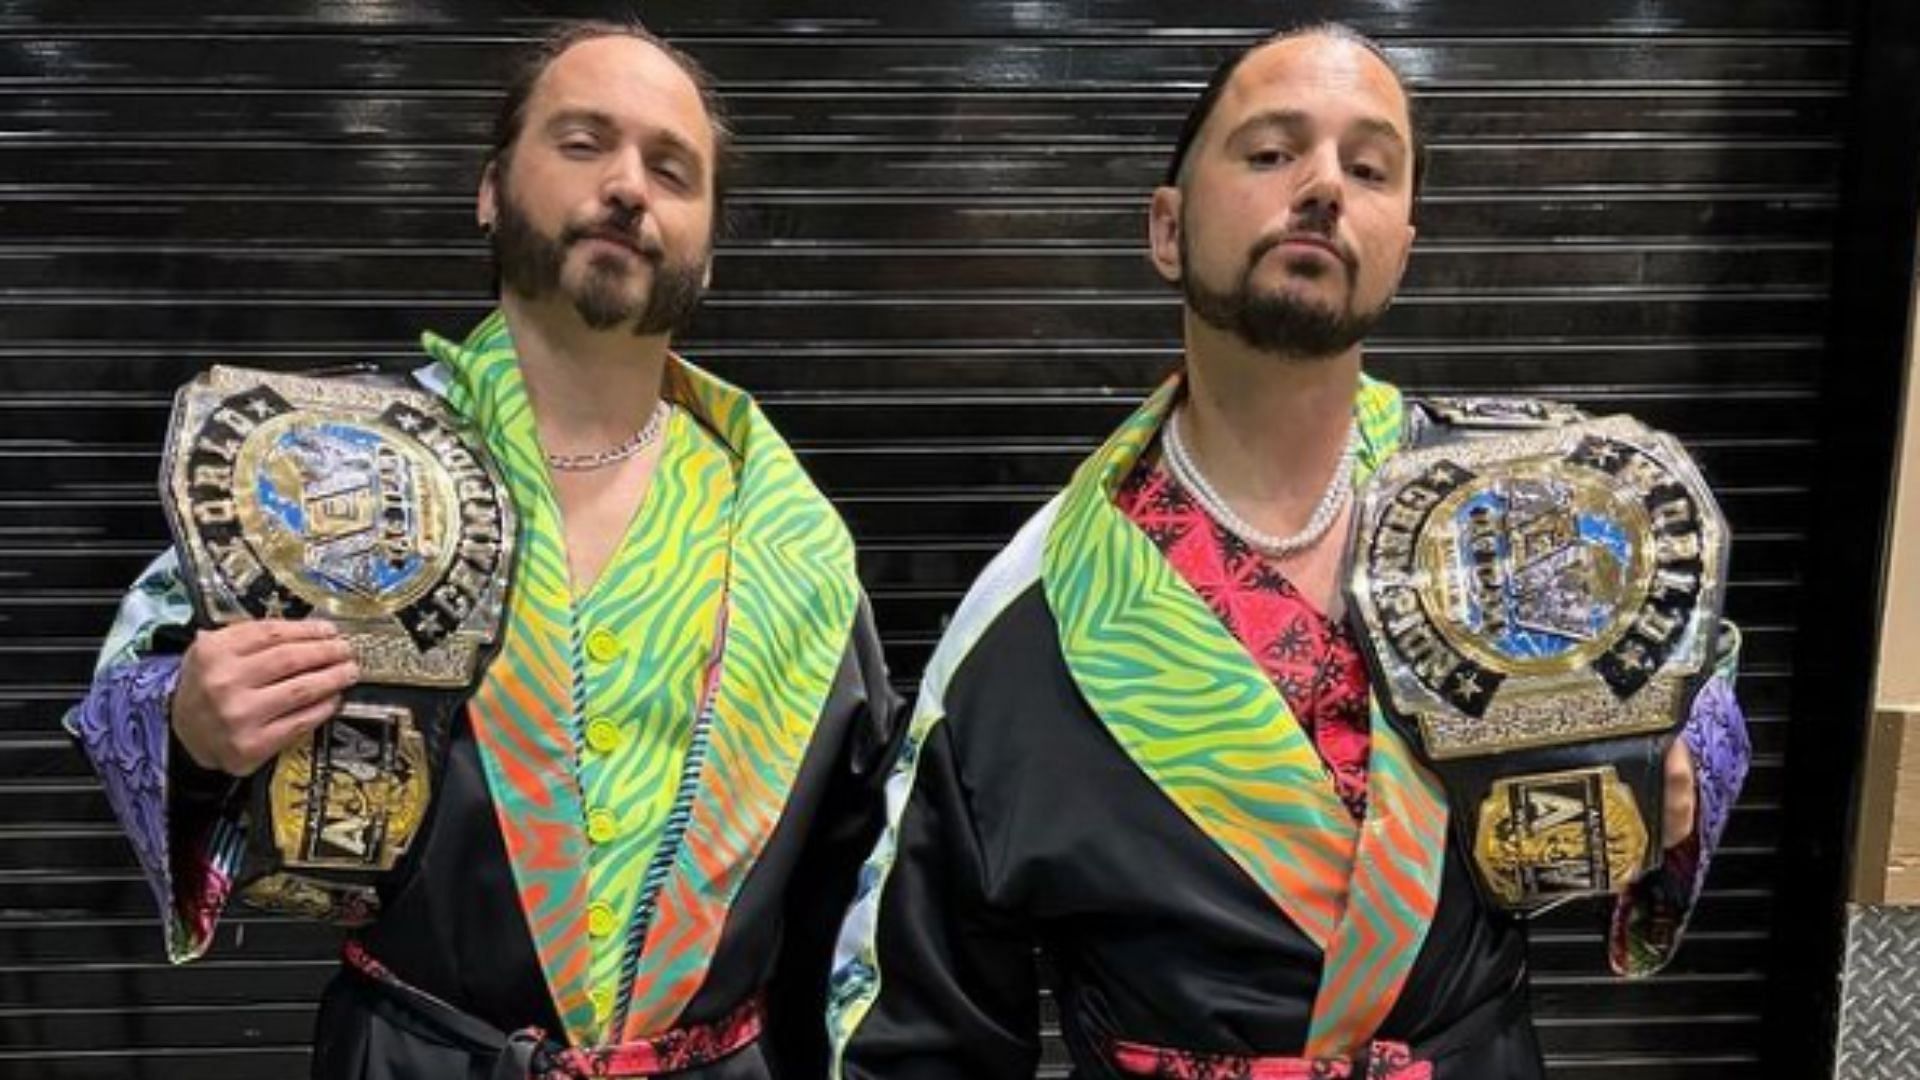 The Young Bucks are the reigning AEW World Tag Team Champions [Image Credits: Nicholas Jackson